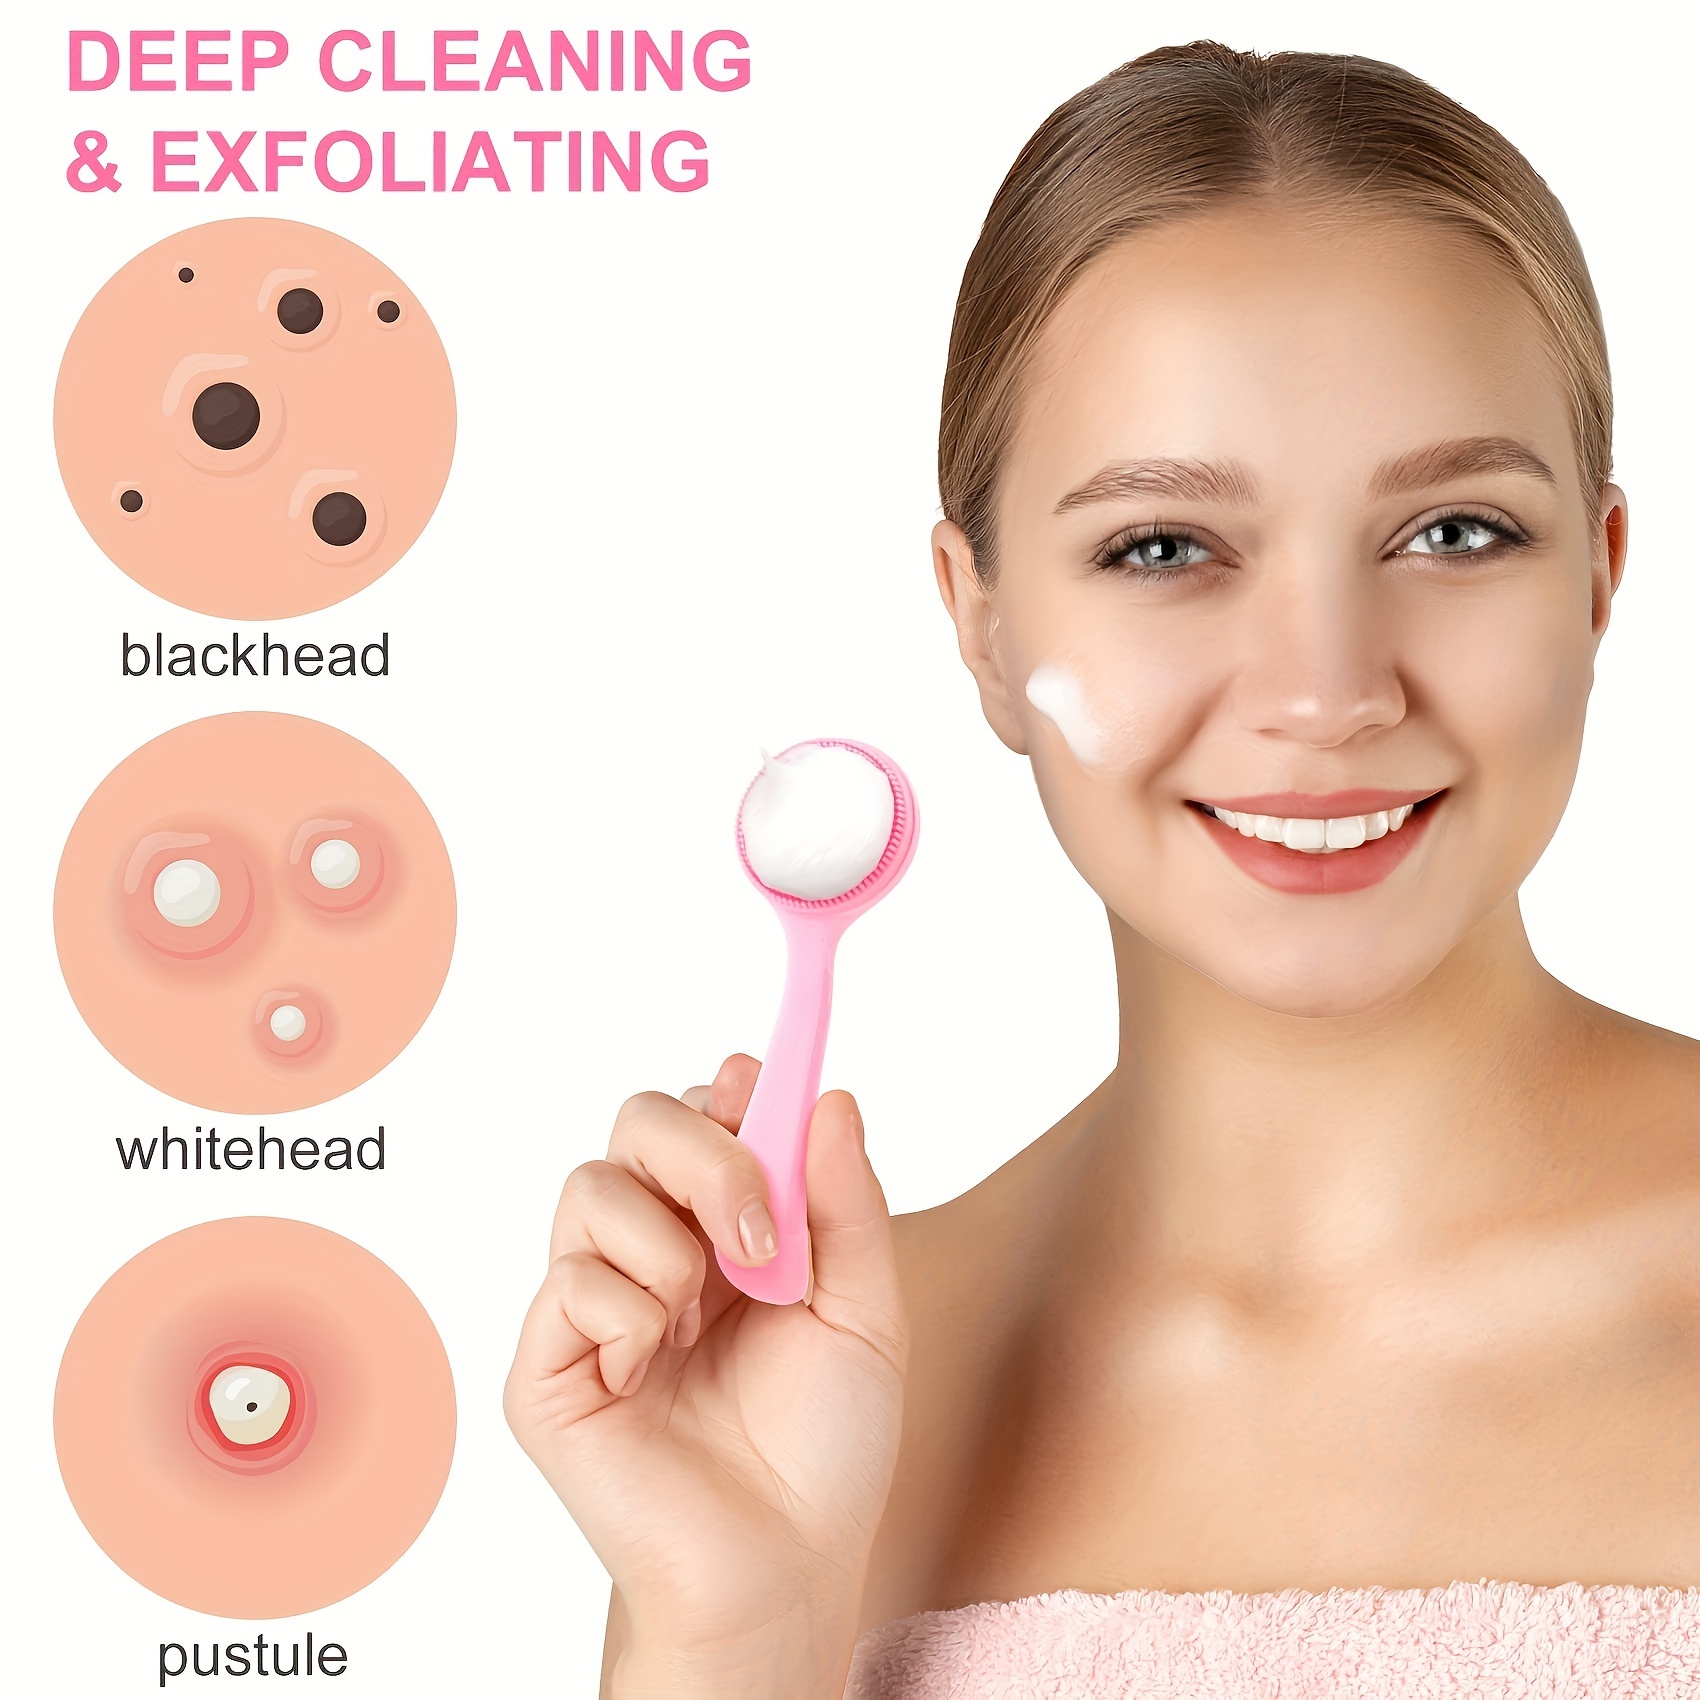 Silicone Facial Cleansing Brush 3 Designs, Beomeen 4 in 1 Handheld